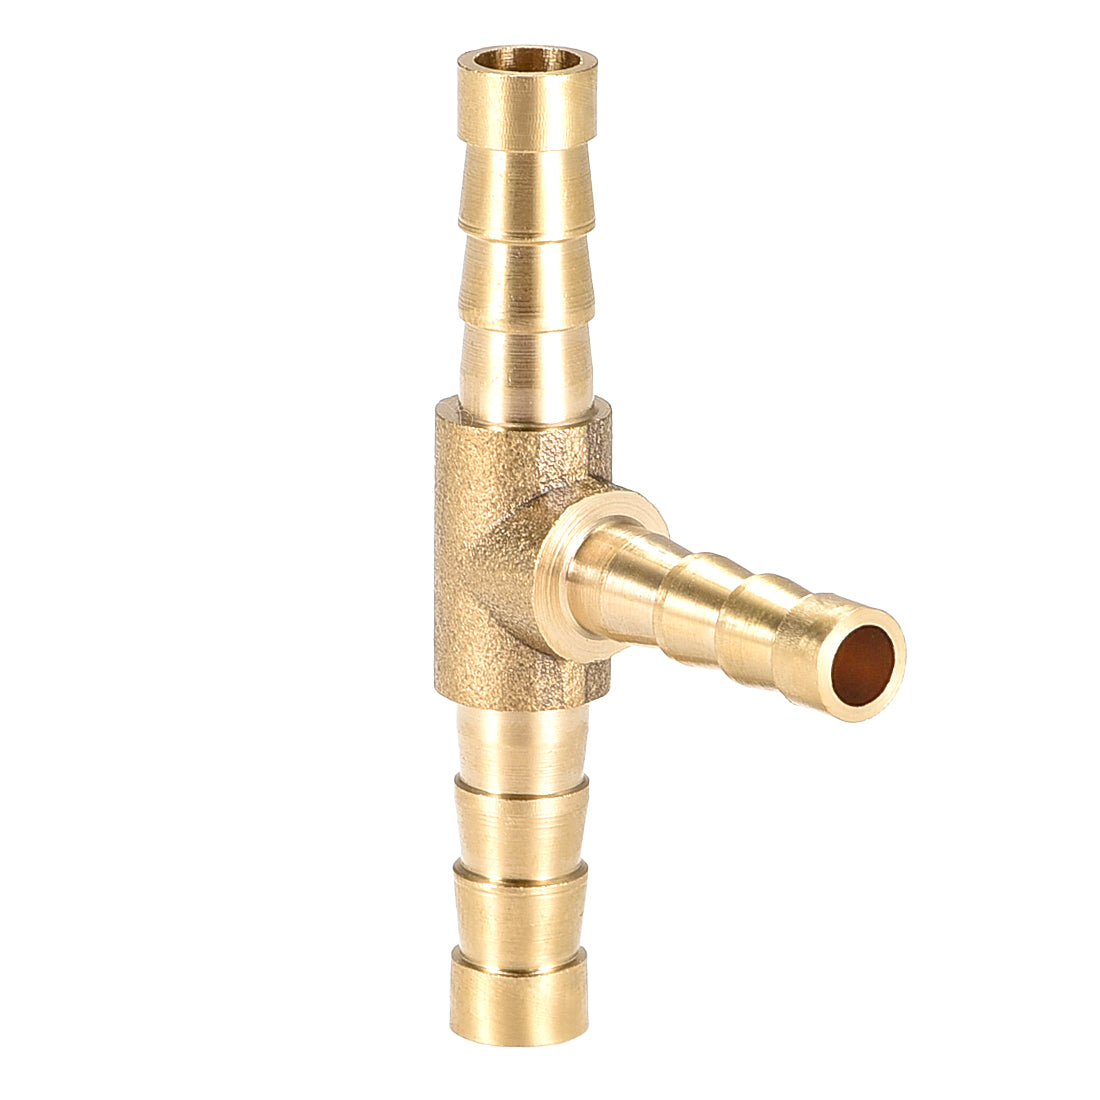 Uxcell Uxcell 10mm x 6mm x 10mm Brass Hose Reducer Barb Fitting Tee T-Shaped 3 Way Barbed Connector Air Water Fuel Gas